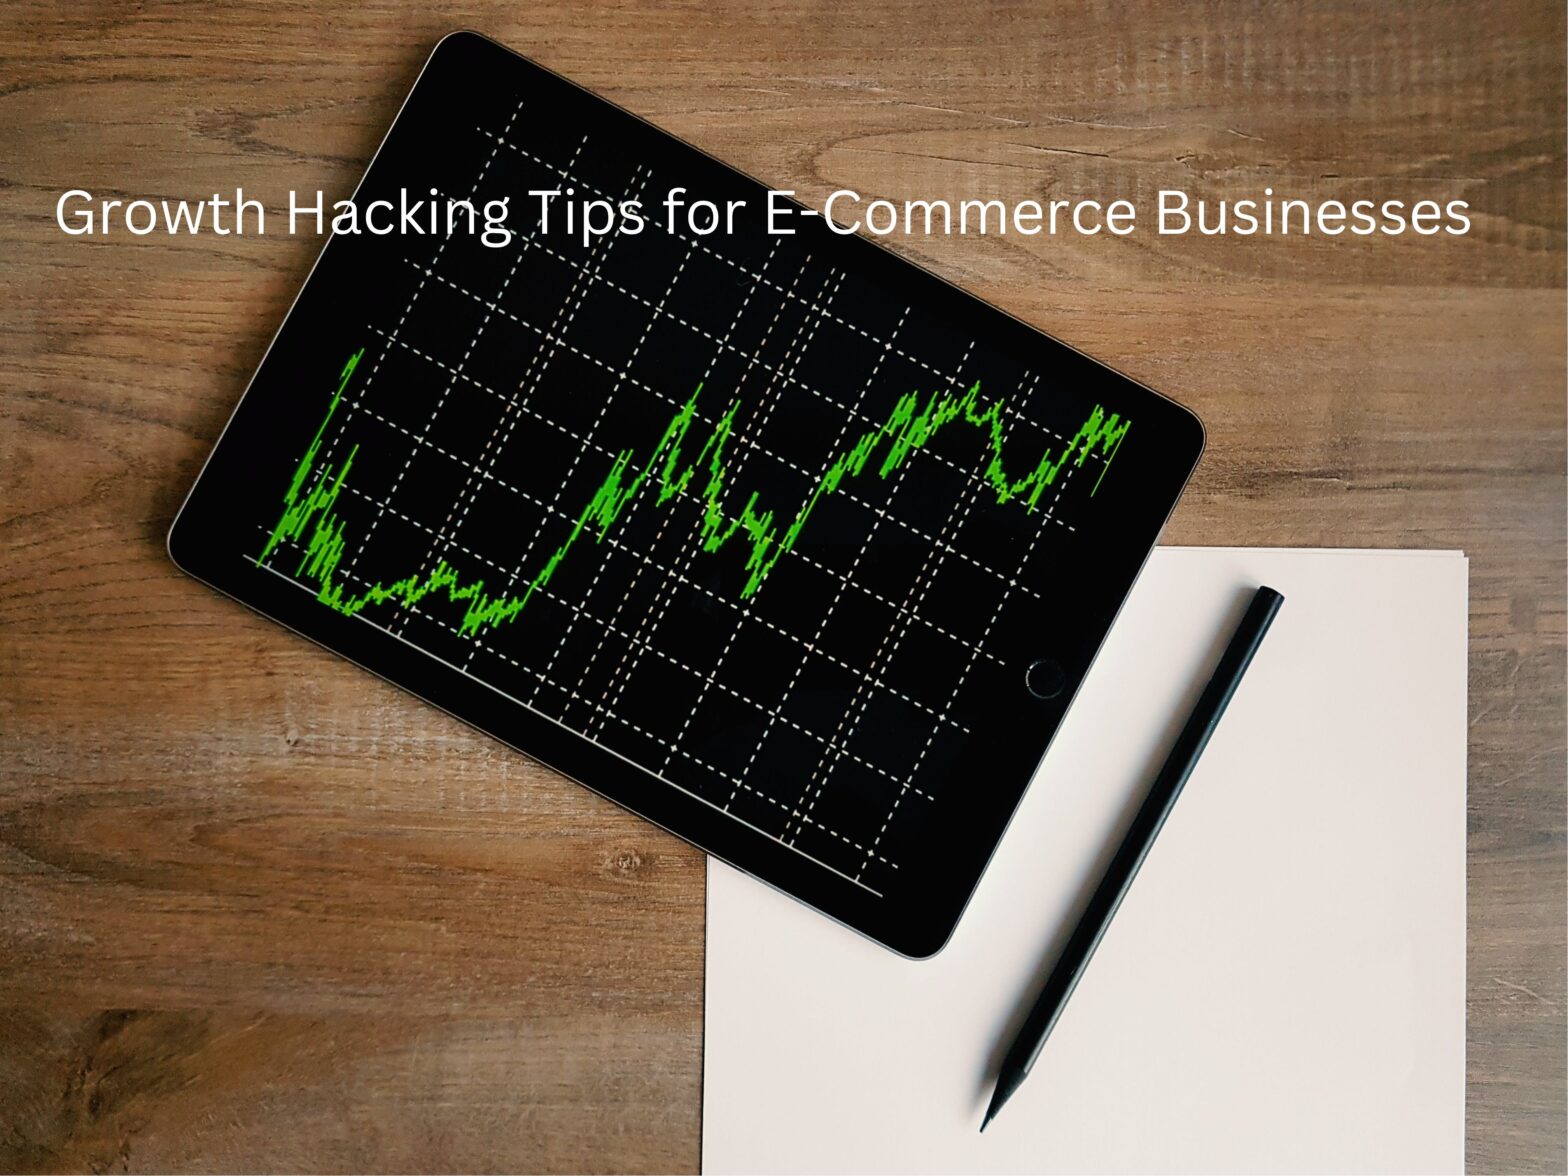 Growth hacking tips for ecommerce businesses